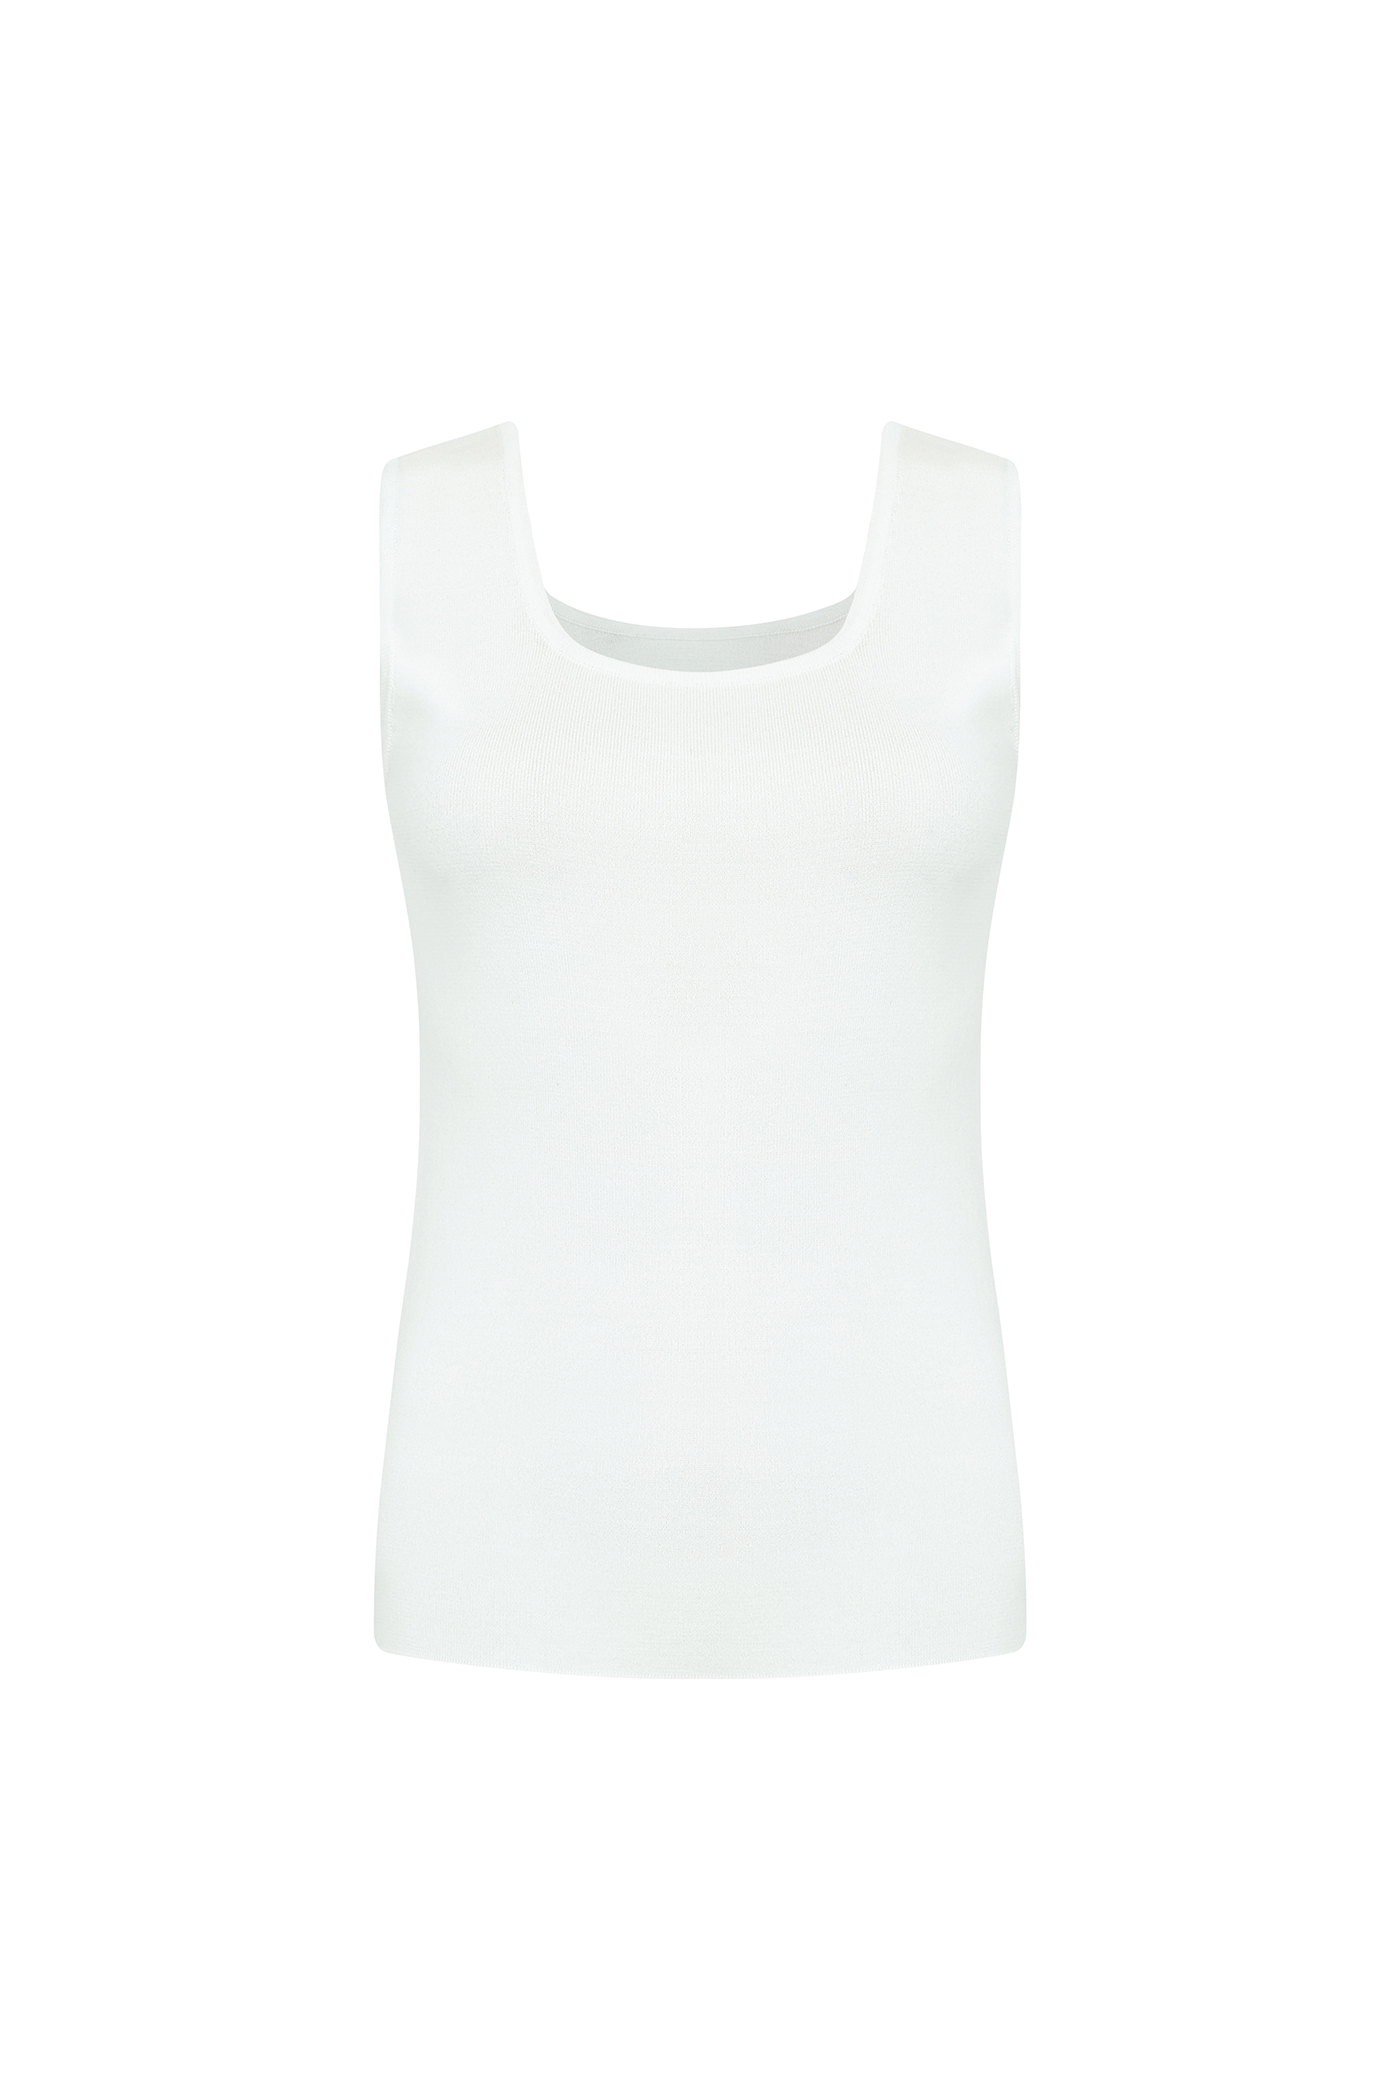 Square Sleeveless[LMBCSUKN184]-5color